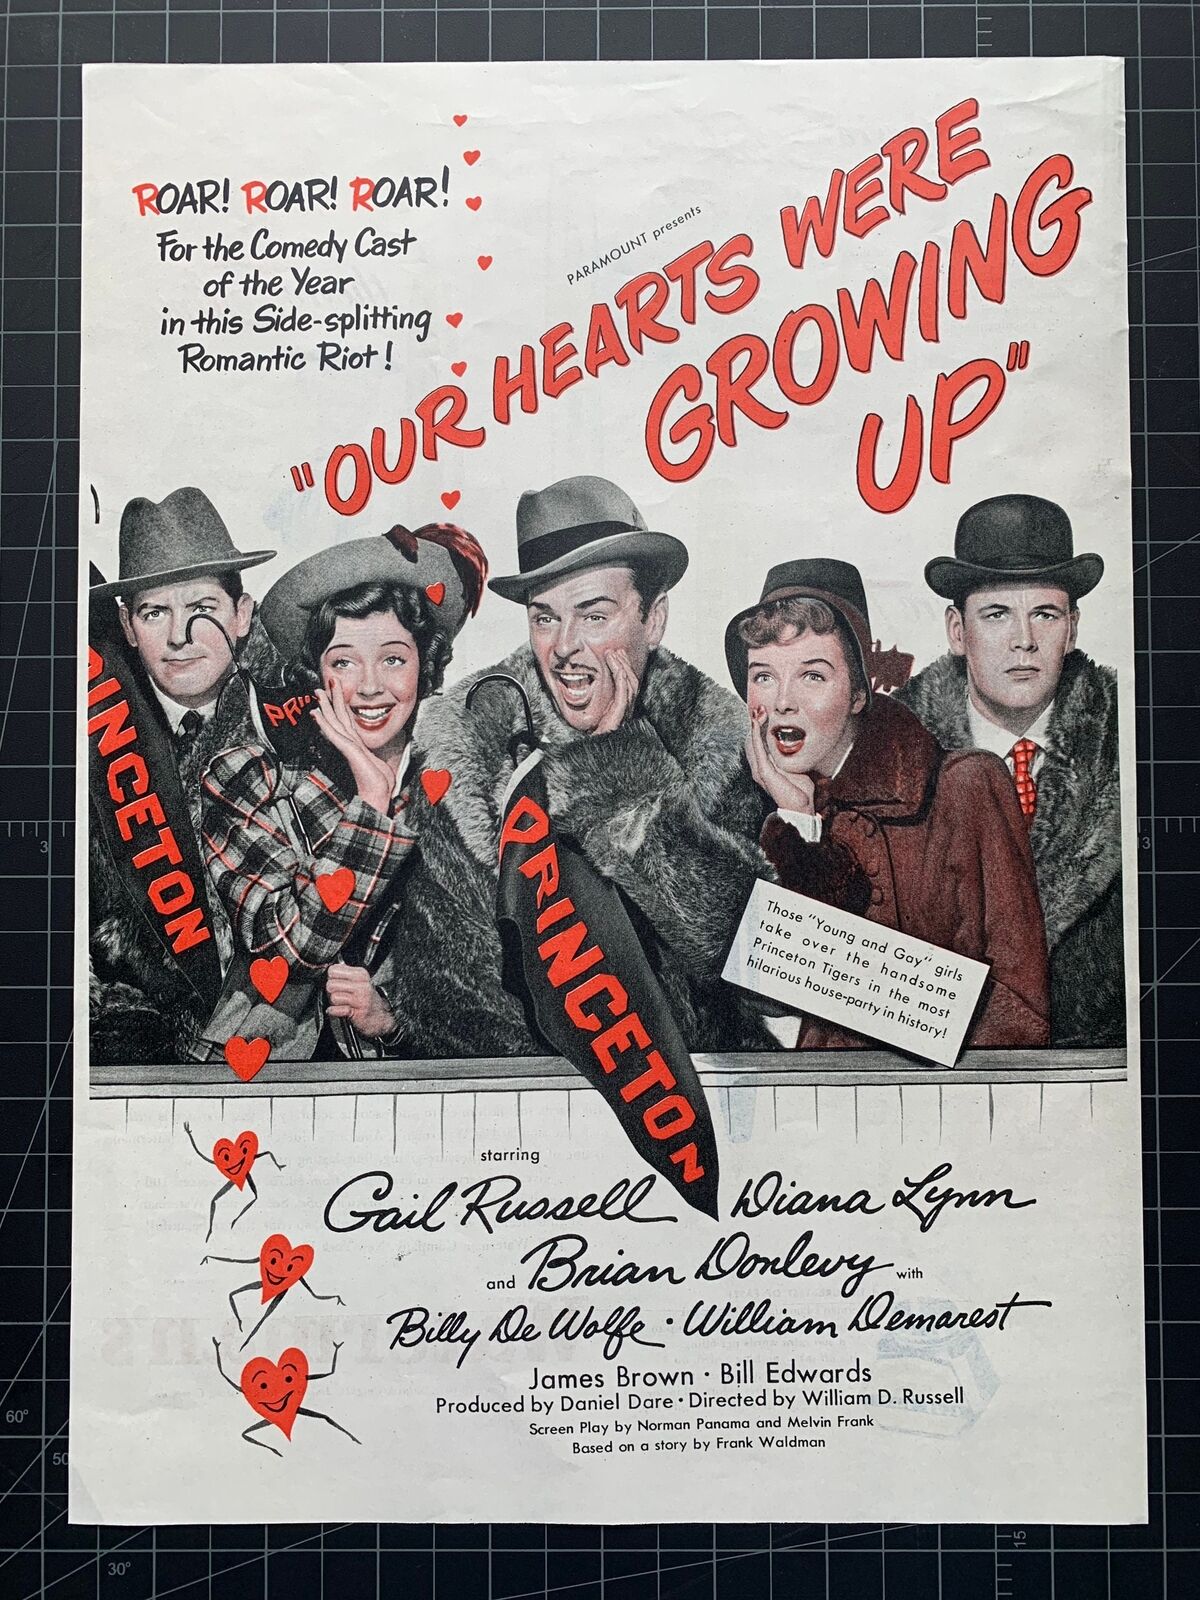 Vintage 1946 “Our Hearts Were Growing Up” Film, Gail Russell, Brian Donley